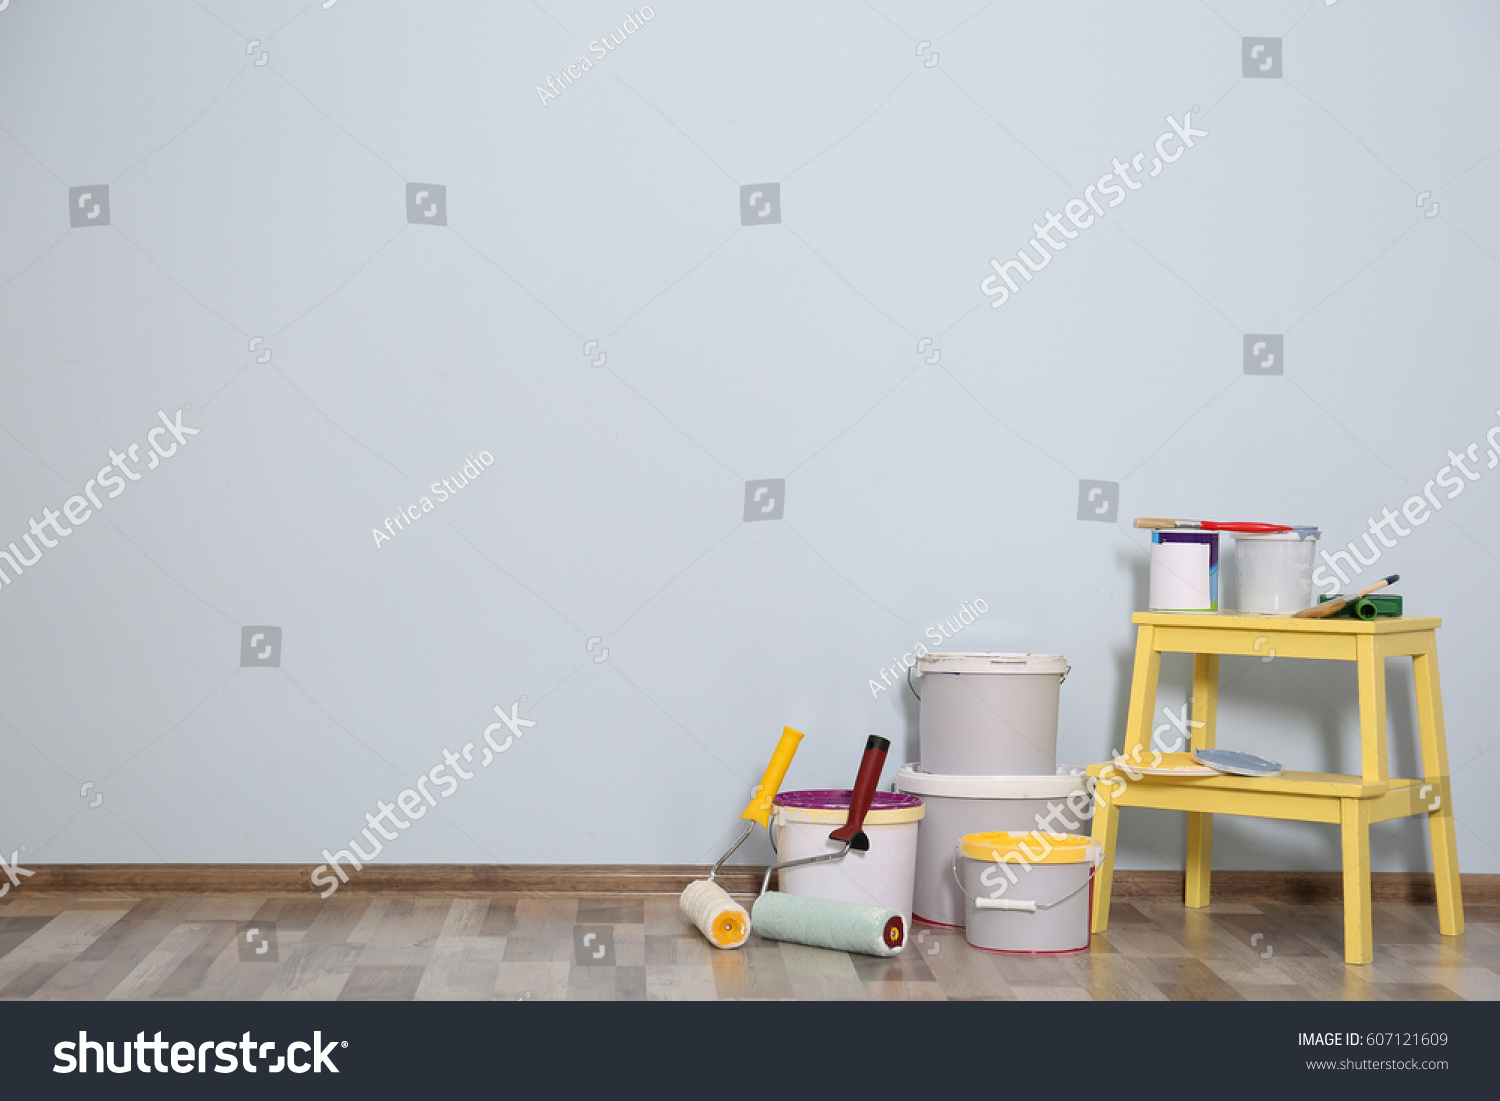 Set for wall painting in empty room #607121609